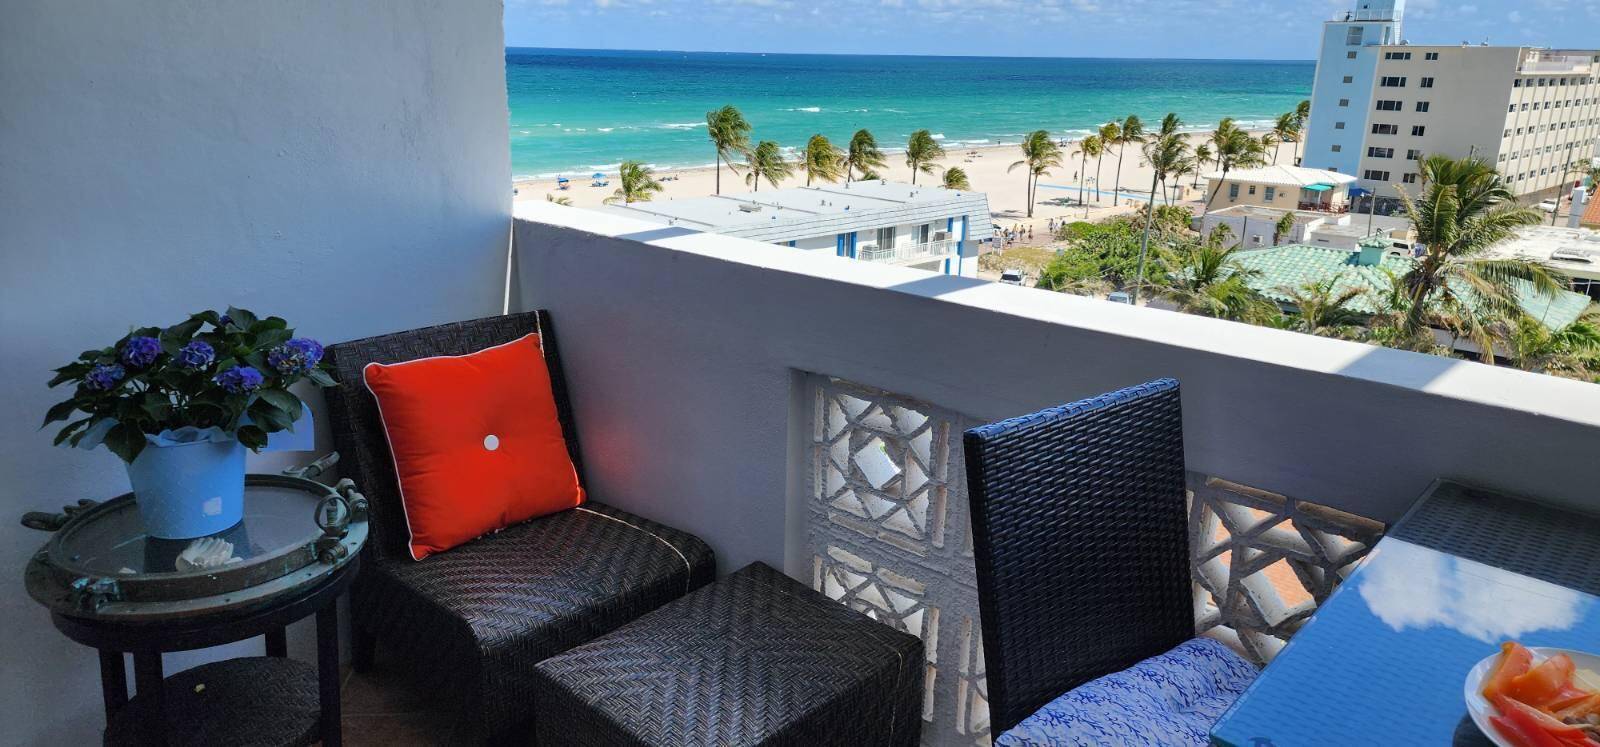 BEACH SIDE LIVING ! Oceanside fully furnished 2bedroom 2 complete bath unit just steps from Hollywood Beach.